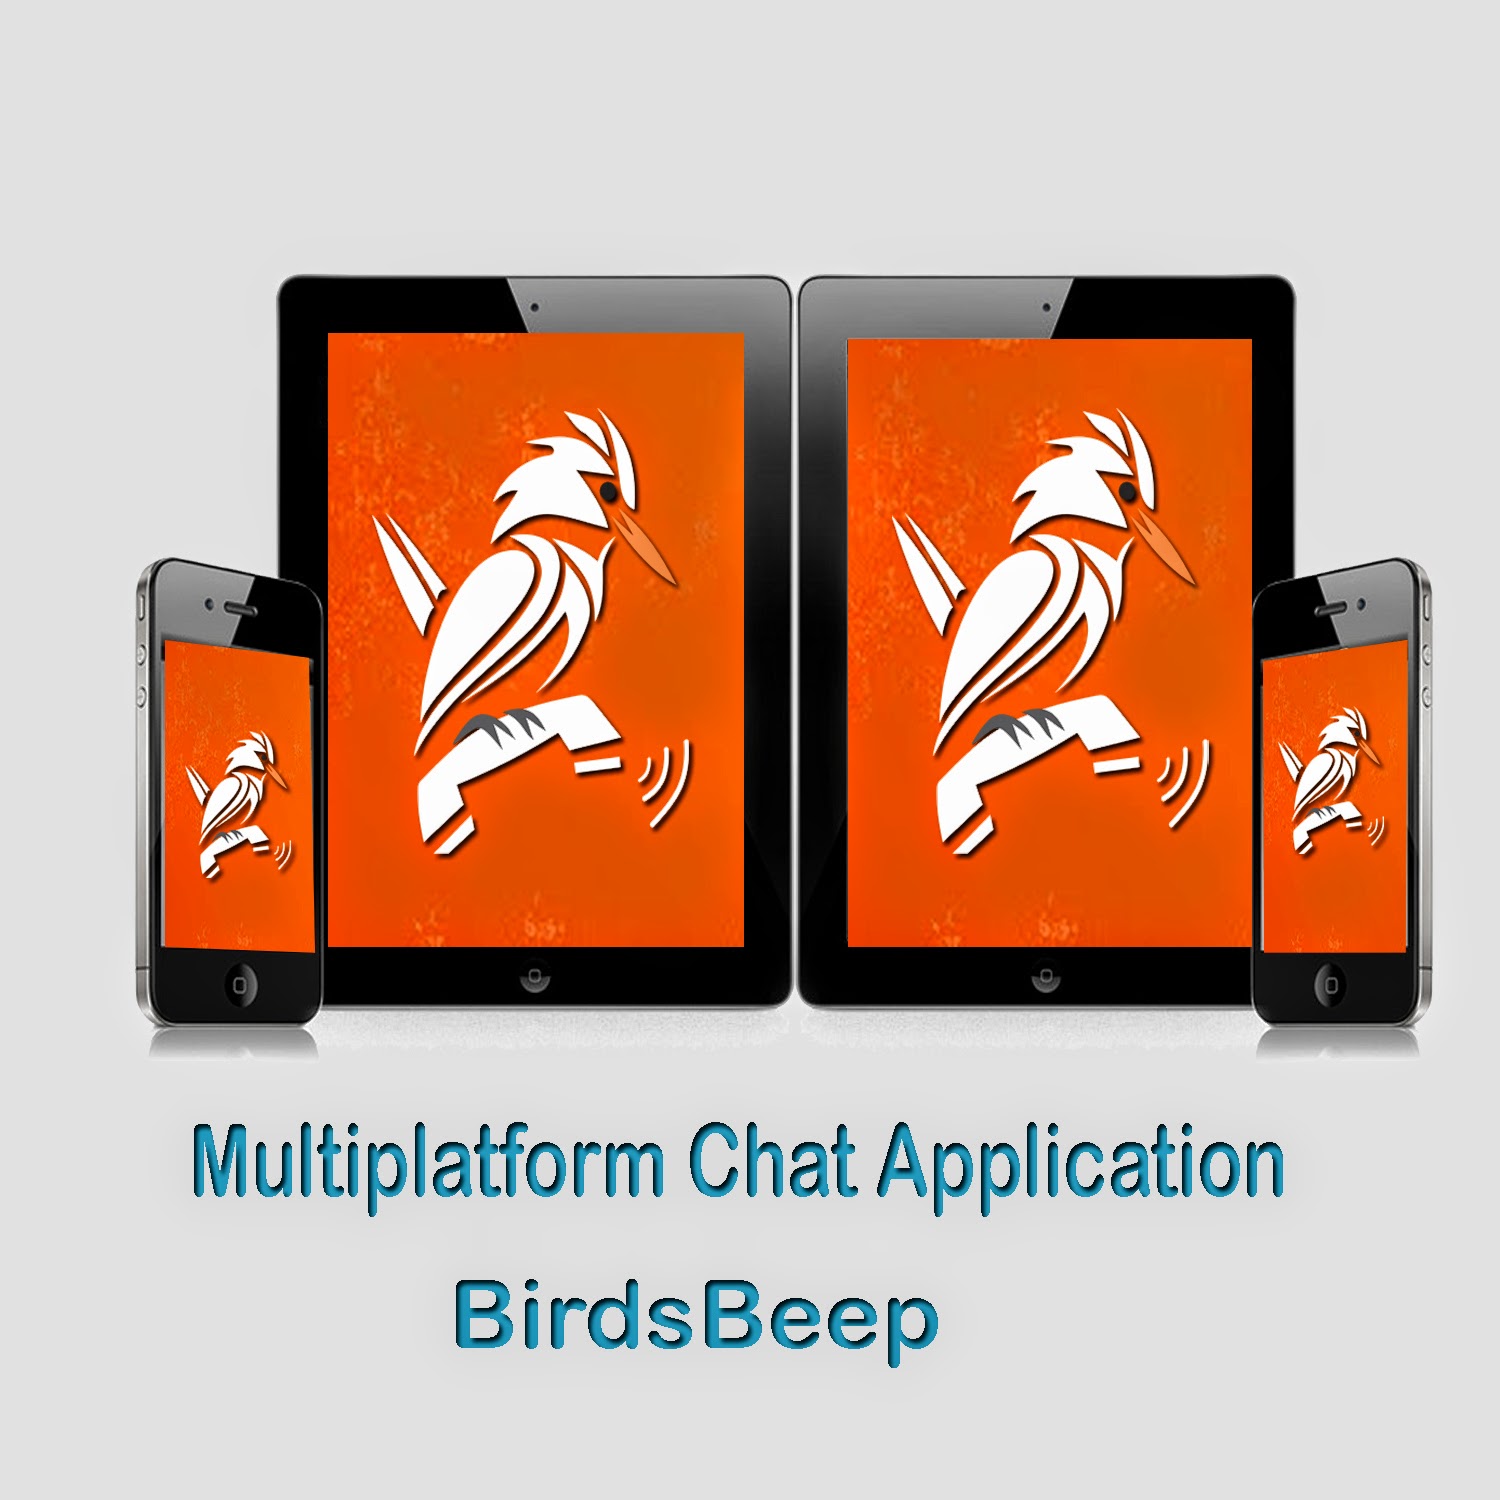 Mobile Chat Applications